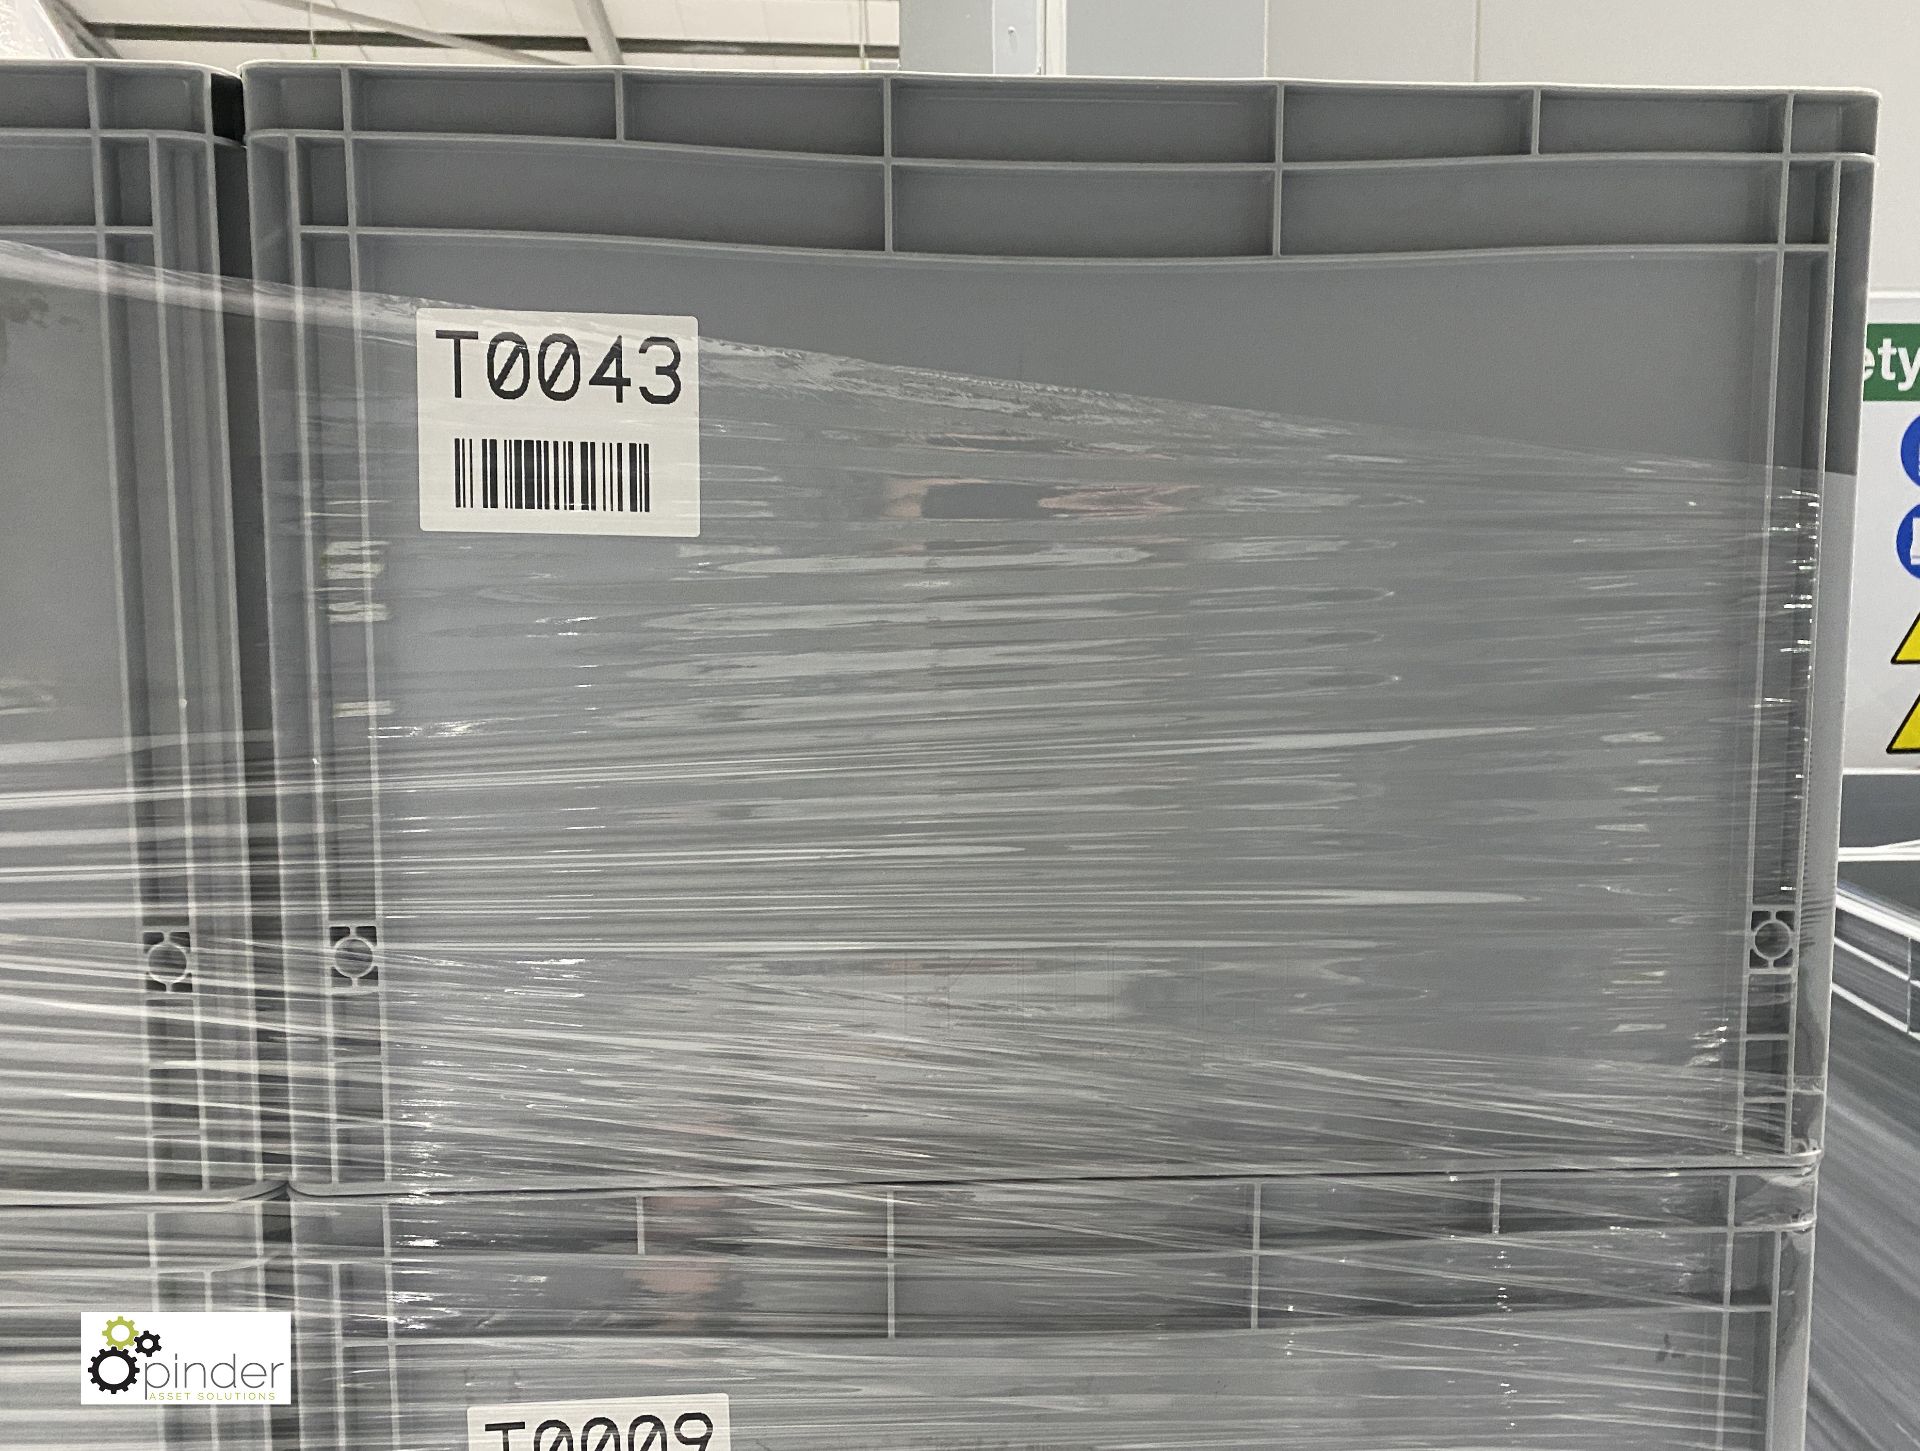 35 Auer plastic Stackable Bins, 600mm x 395mm x 405mm deep, with quantity lids - Image 4 of 5